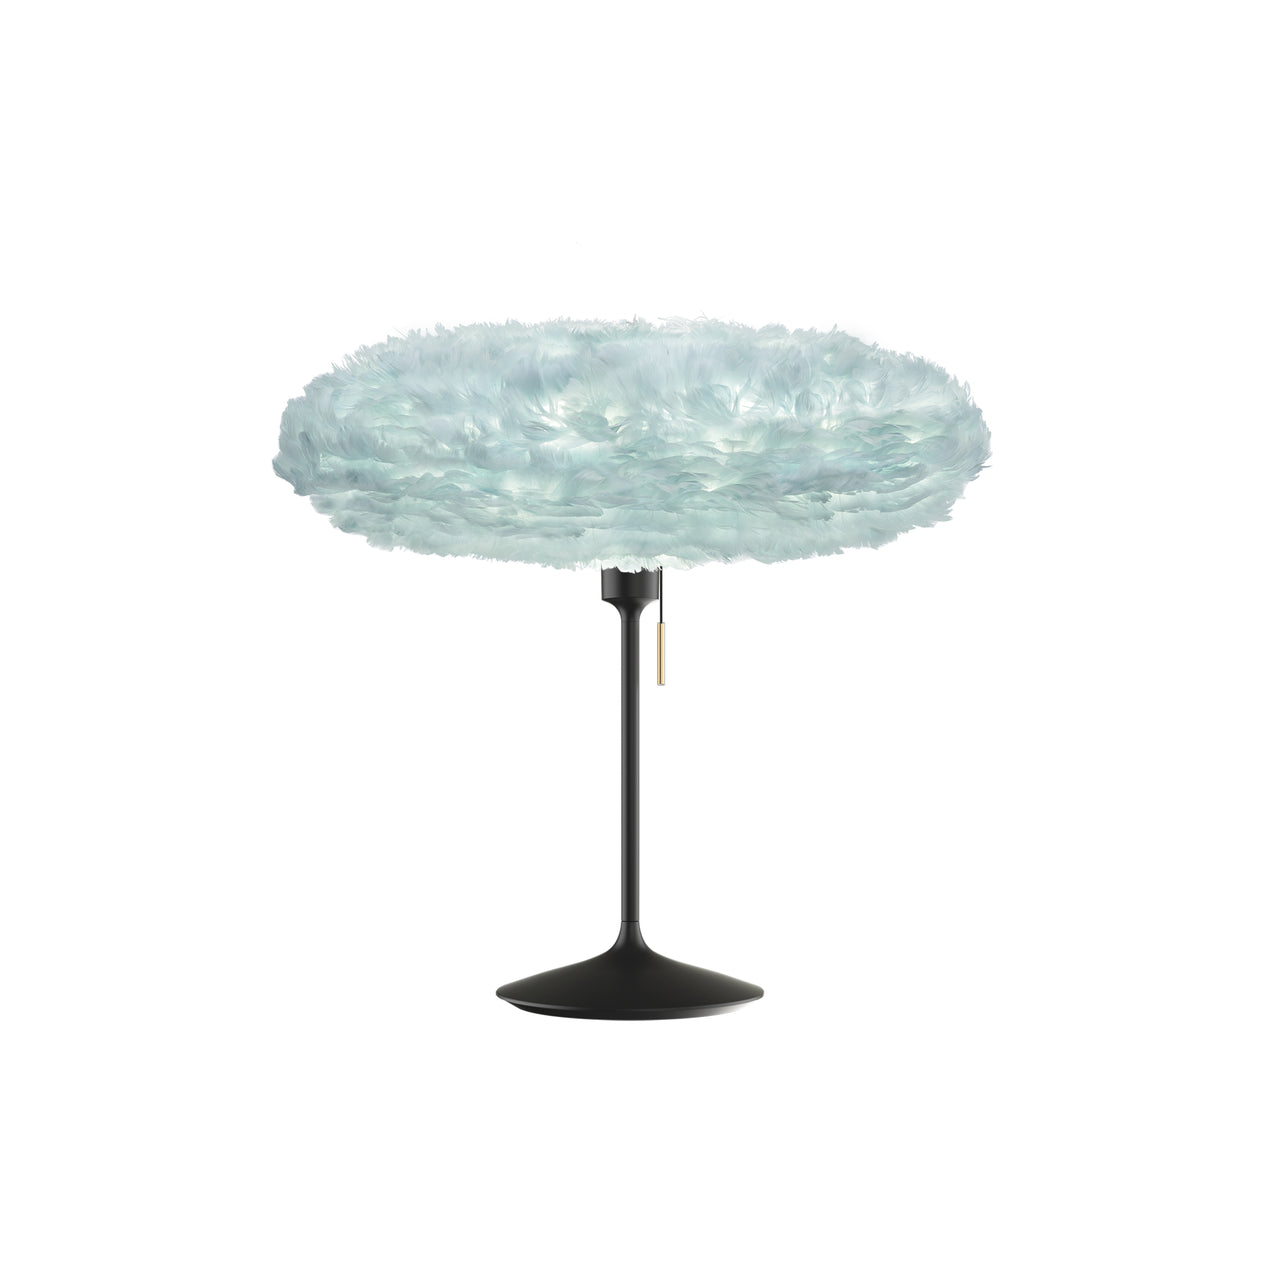 Eos Esther Champagne Table Lamp: Medium - 24